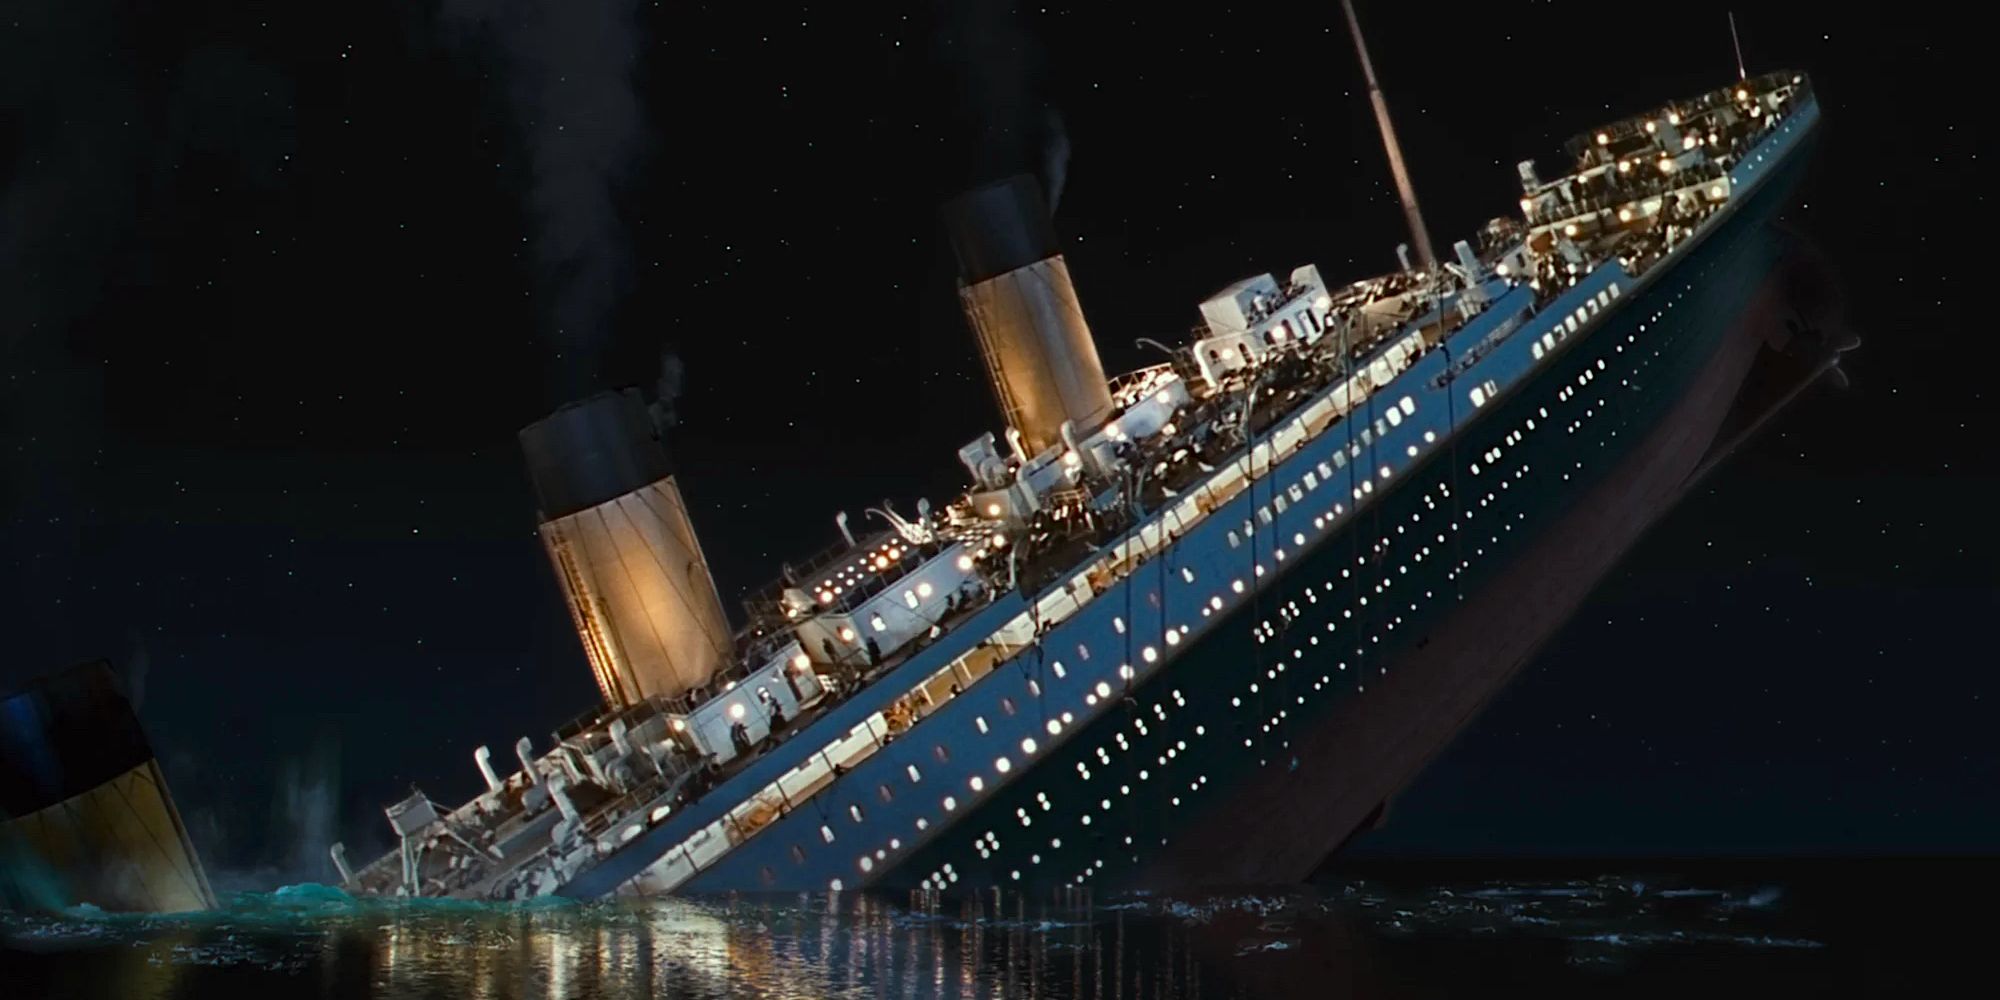 James Cameron Reveals The Clever Trick He Used To Make The Titanic Set Look Bigger